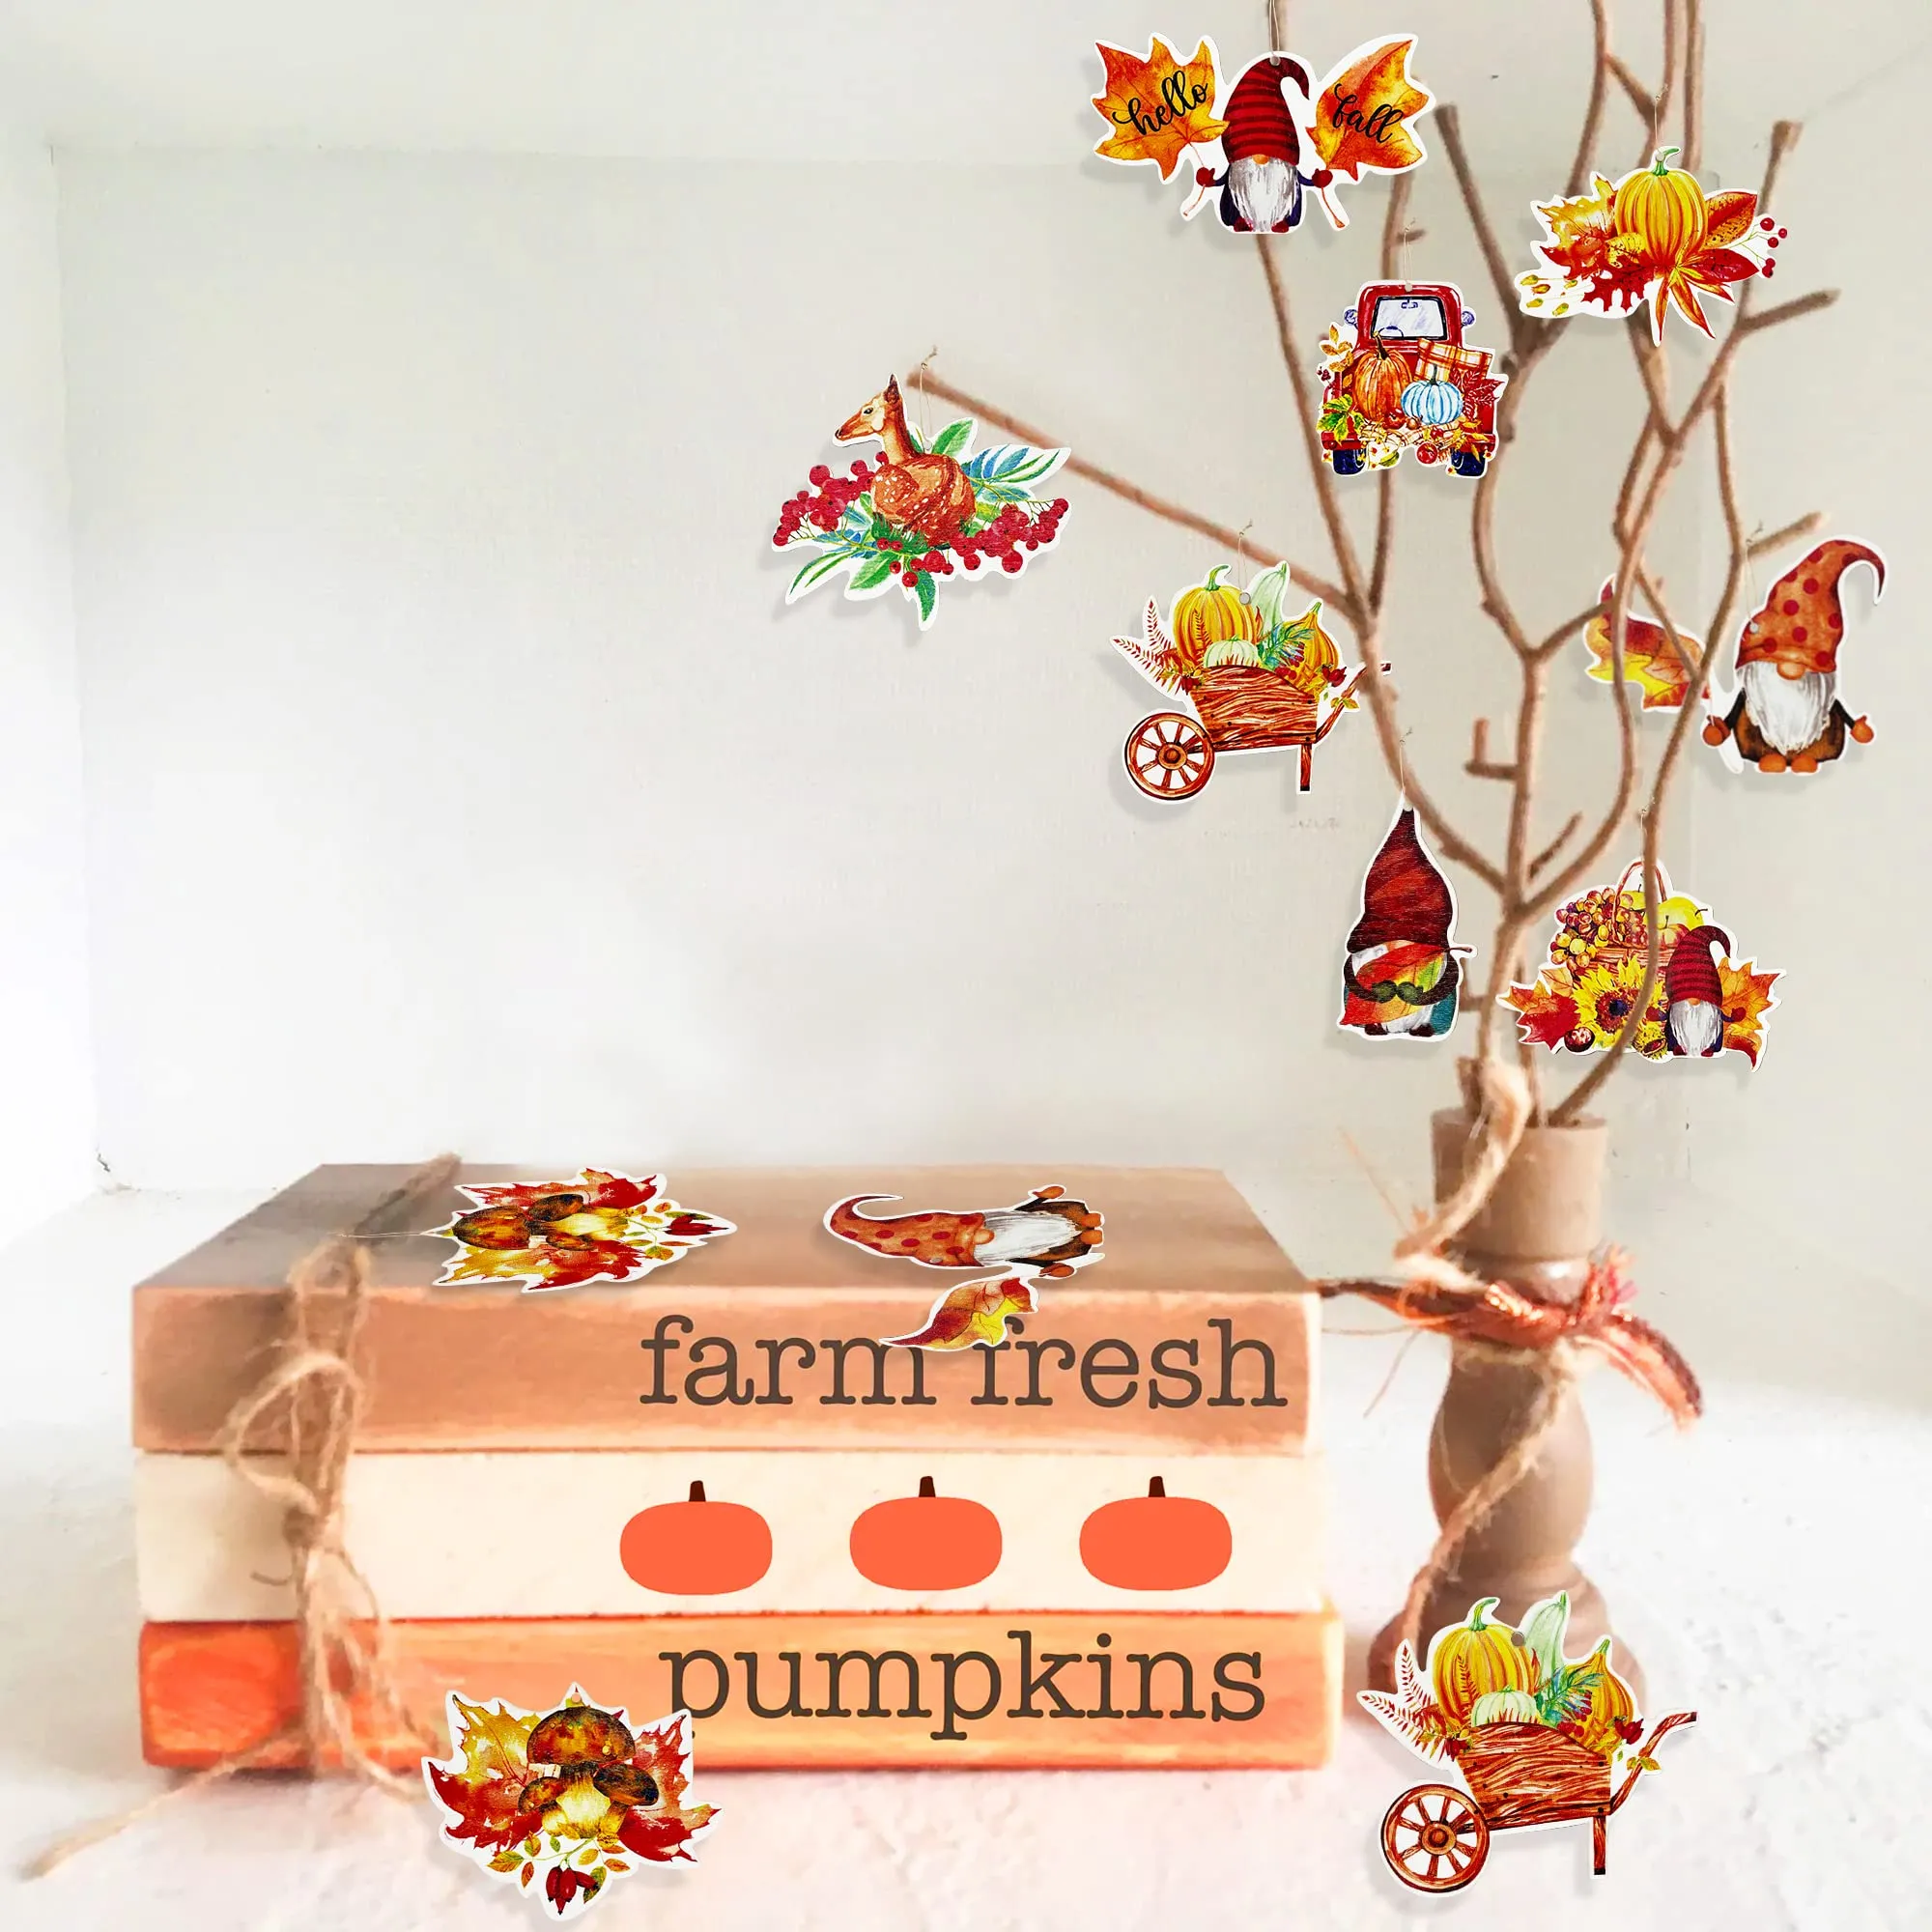 fall tree ornaments gnome autumn maple leaf hello fall sign pumpkin red truck hanging ornaments garlands banner for thanksgiving harvest halloween birthday wedding party decorations supplies